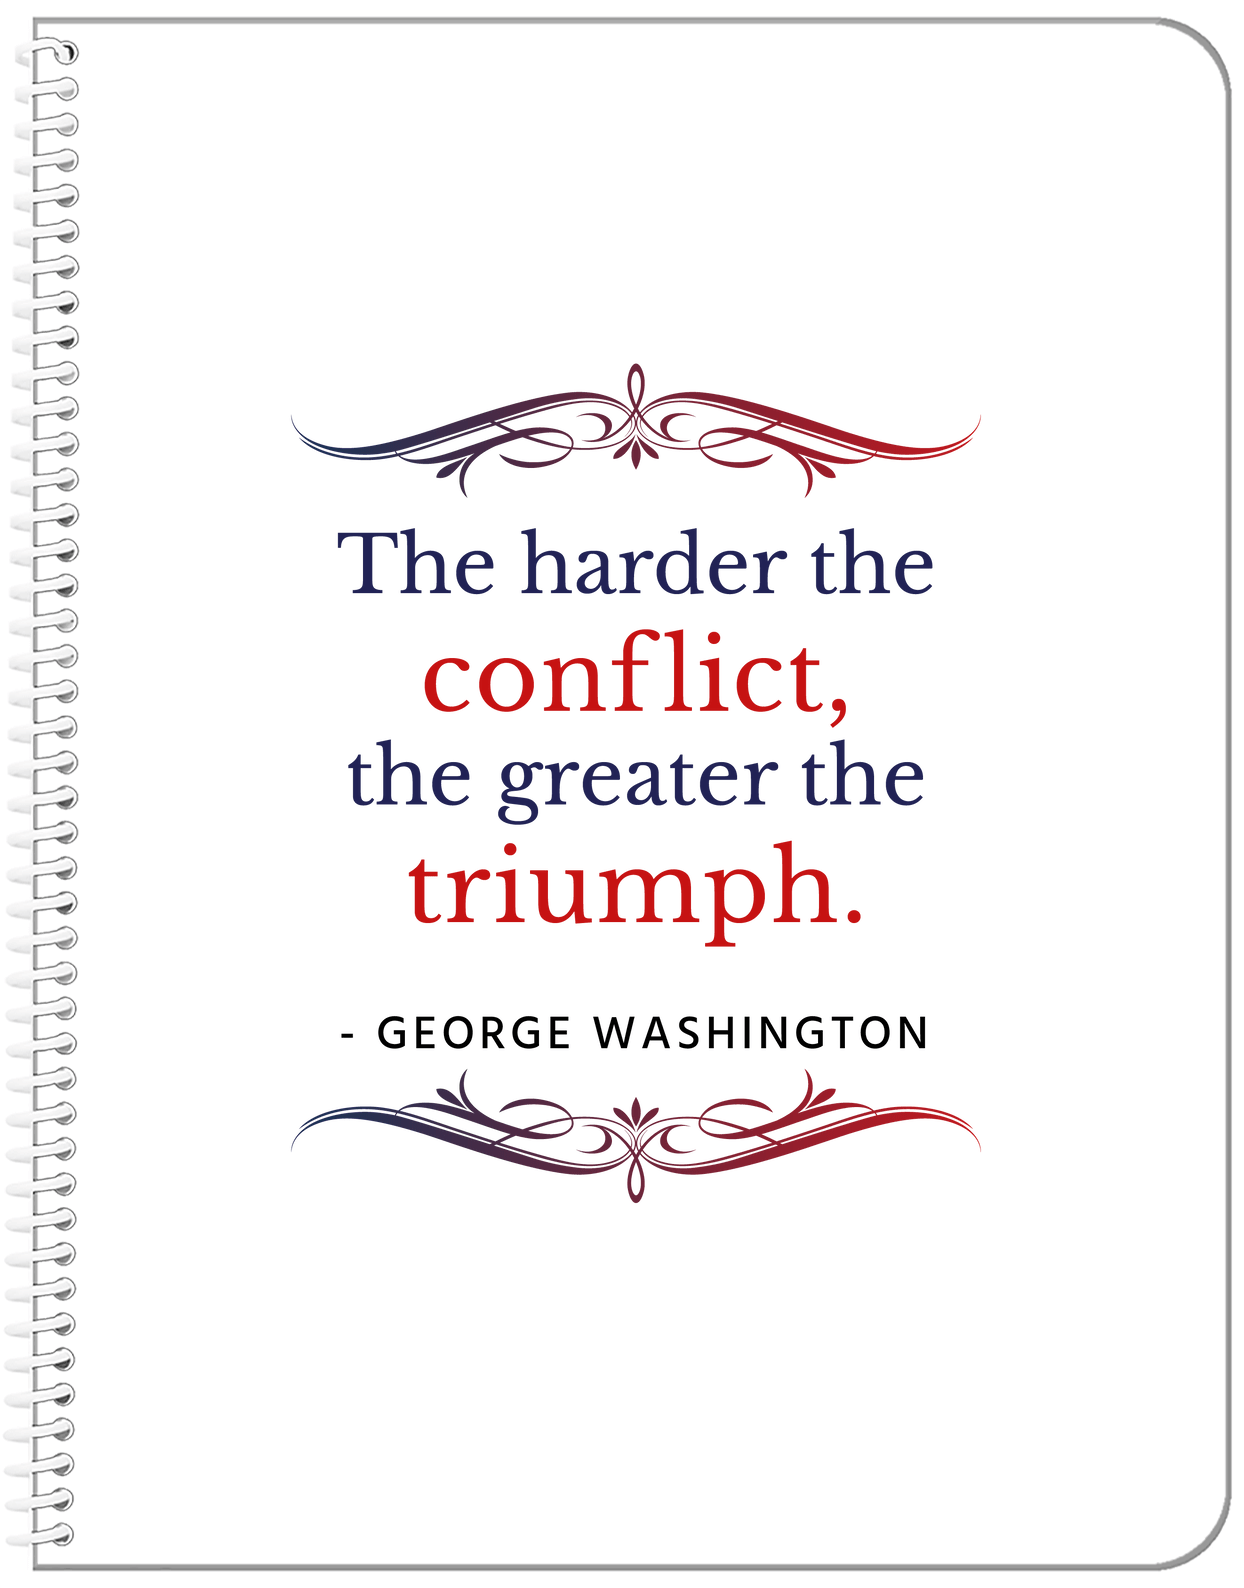 Famous Quotes Notebook - George Washington - Front View